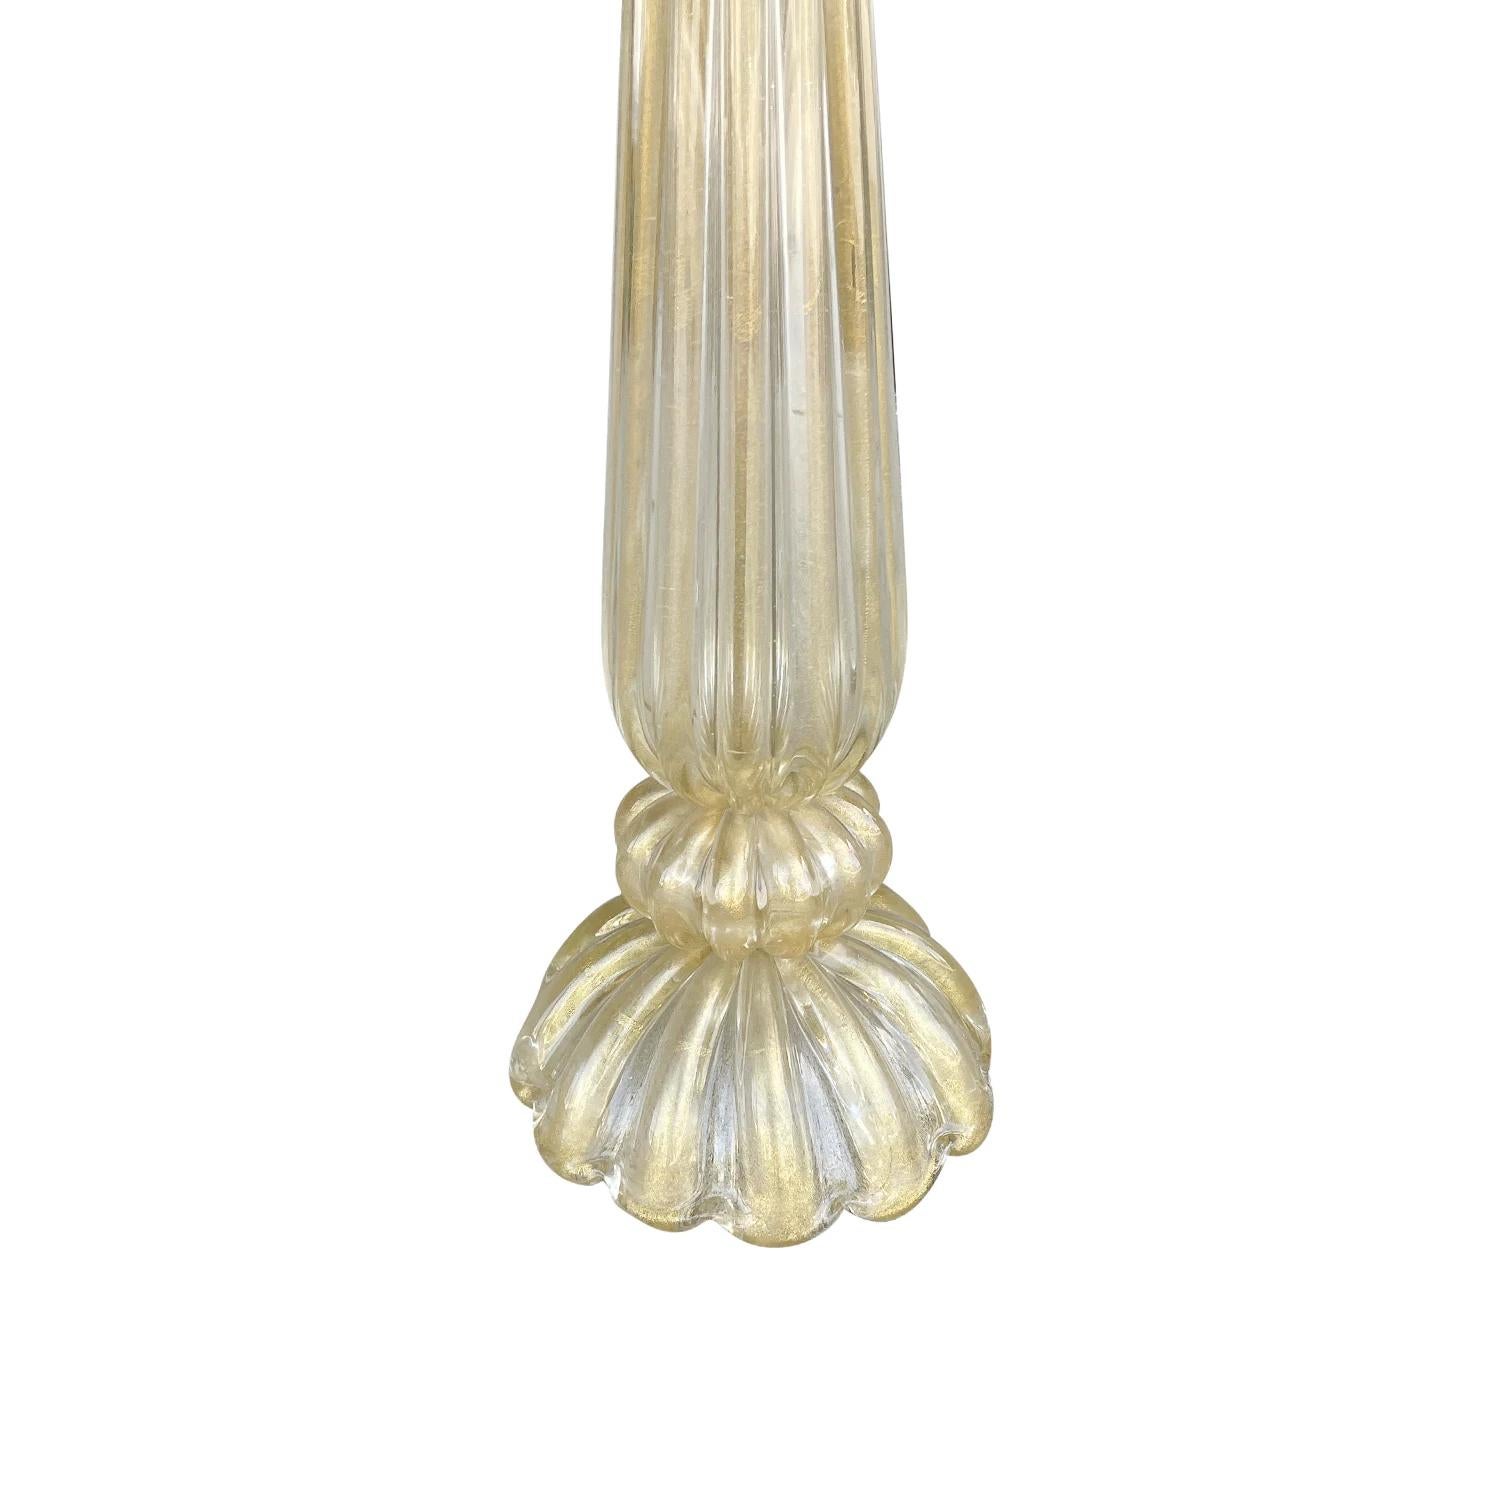 Hand-Crafted 20th Century Italian Tall Vintage Murano Glass Table Lamp by Barovier & Toso For Sale